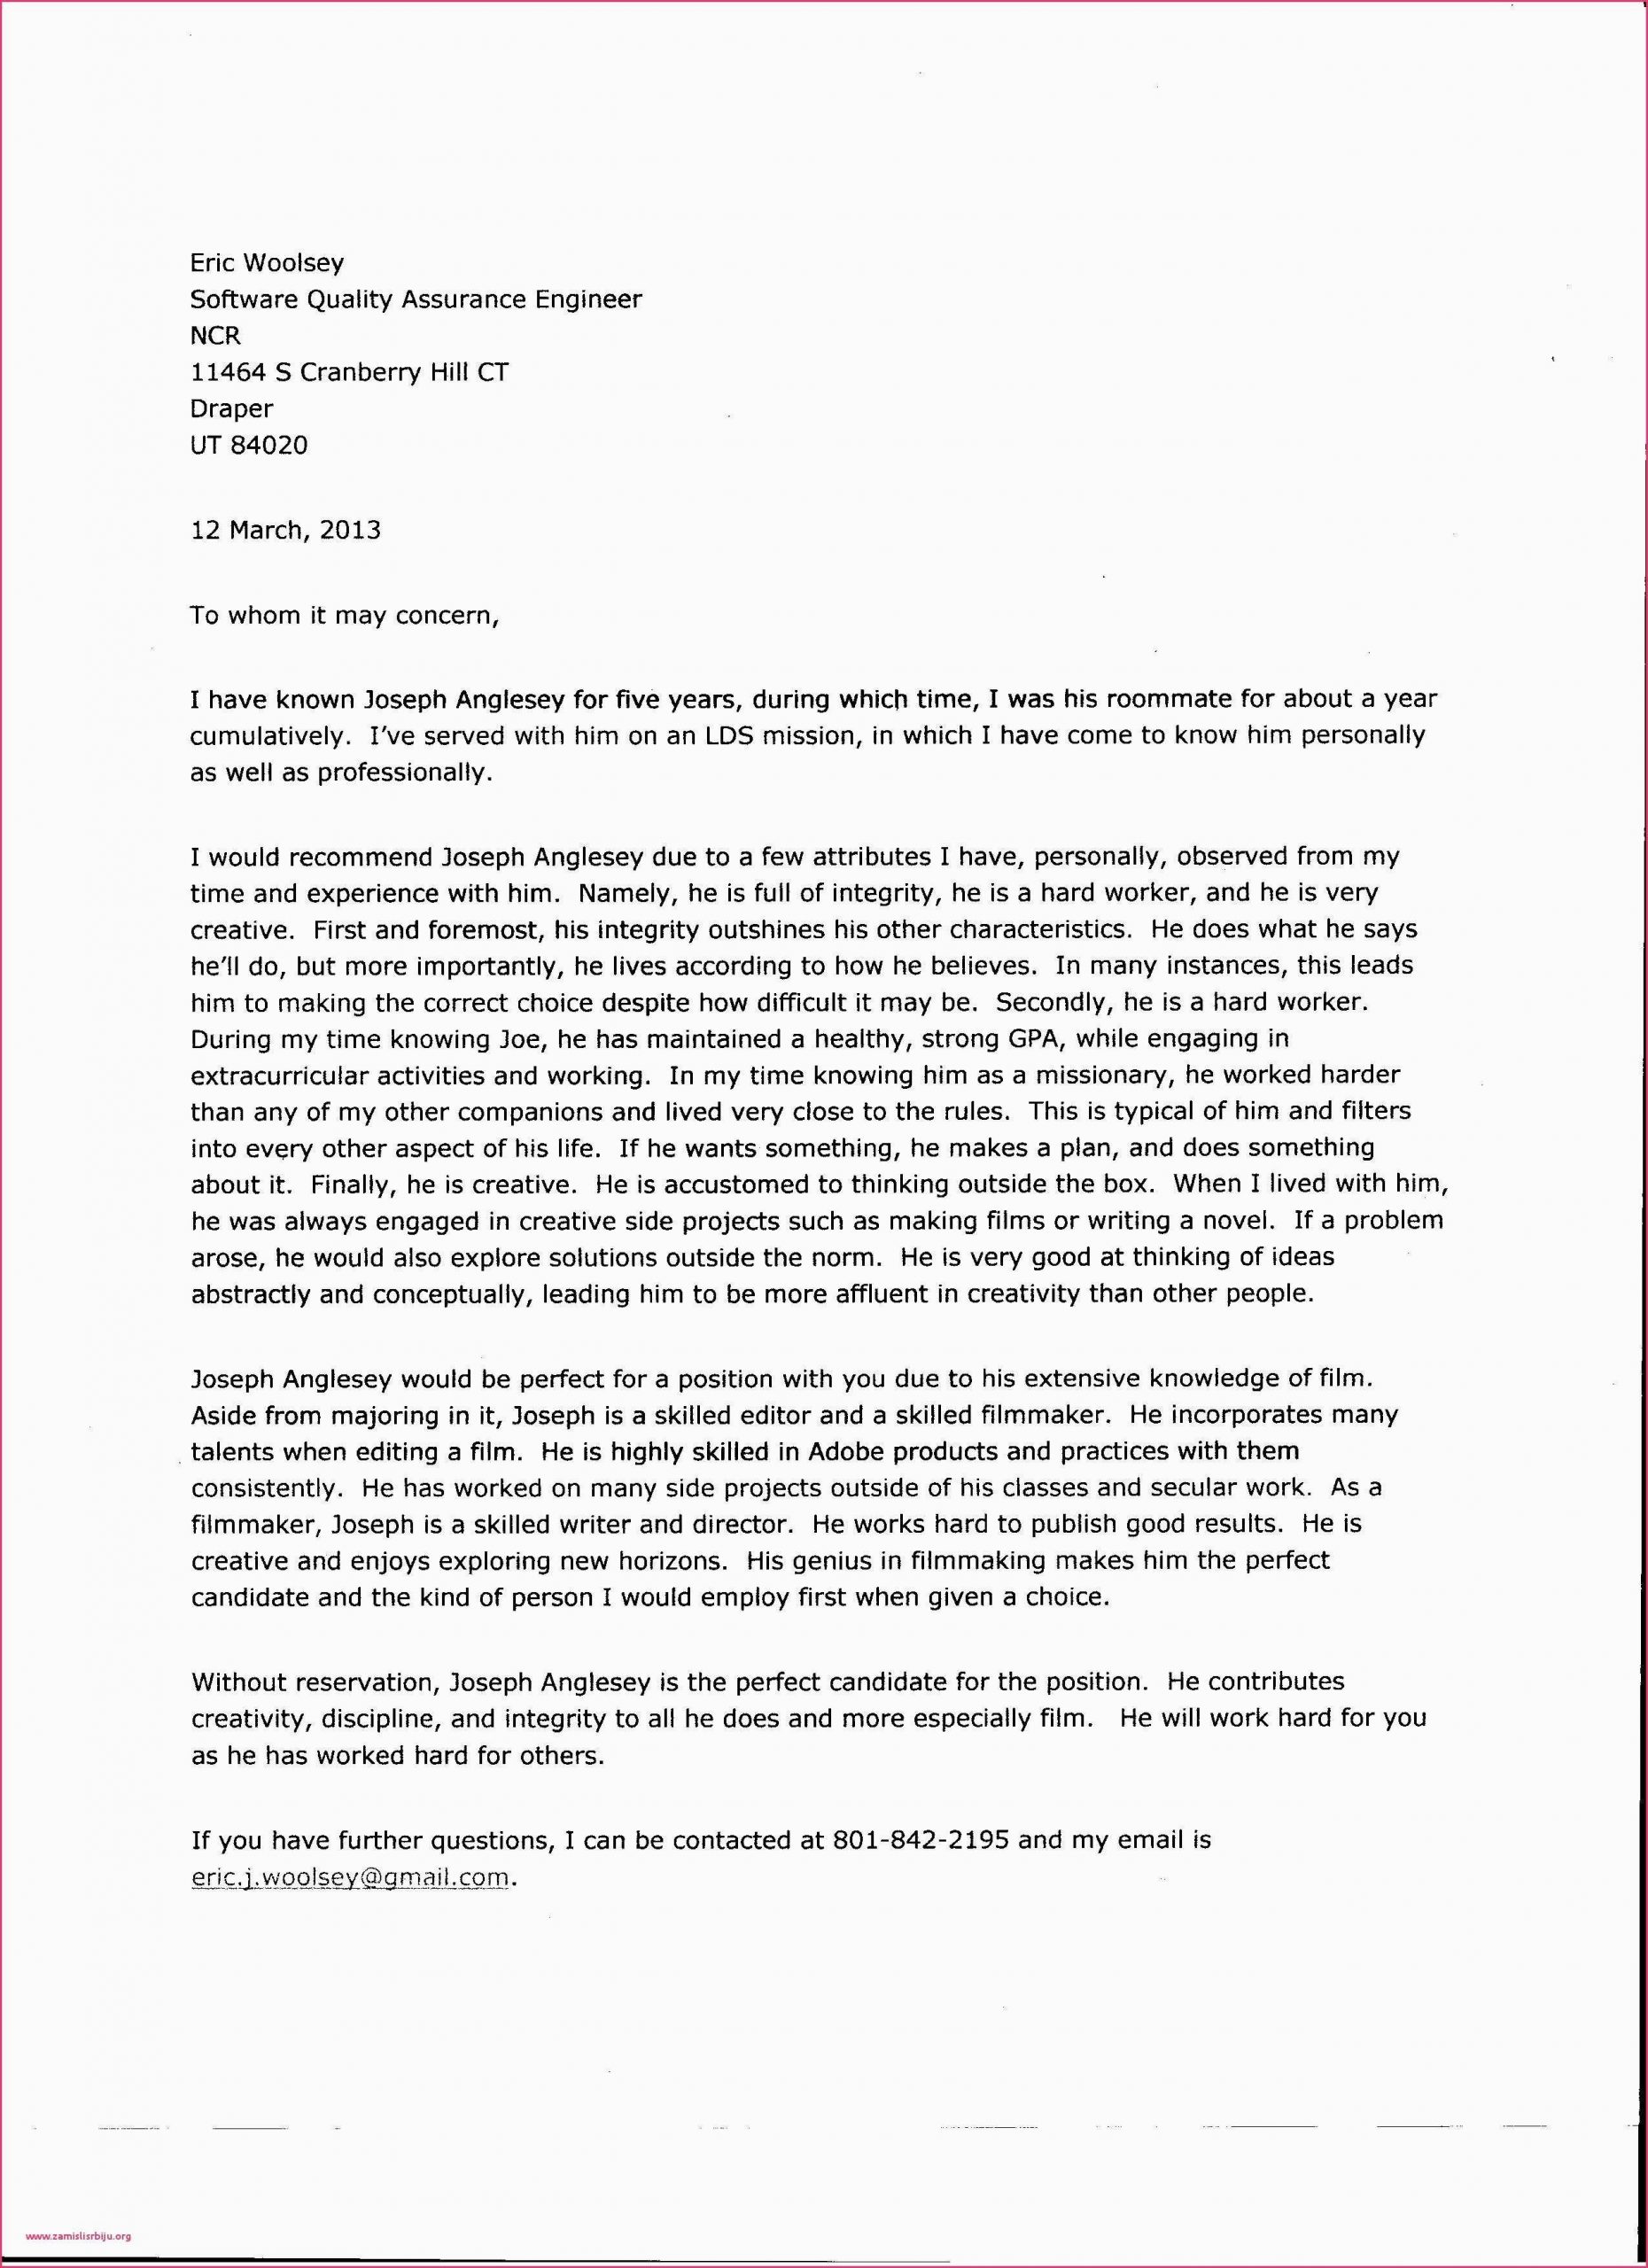 Child Custody Letter Of Recommendation Beautiful Character within proportions 2550 X 3510